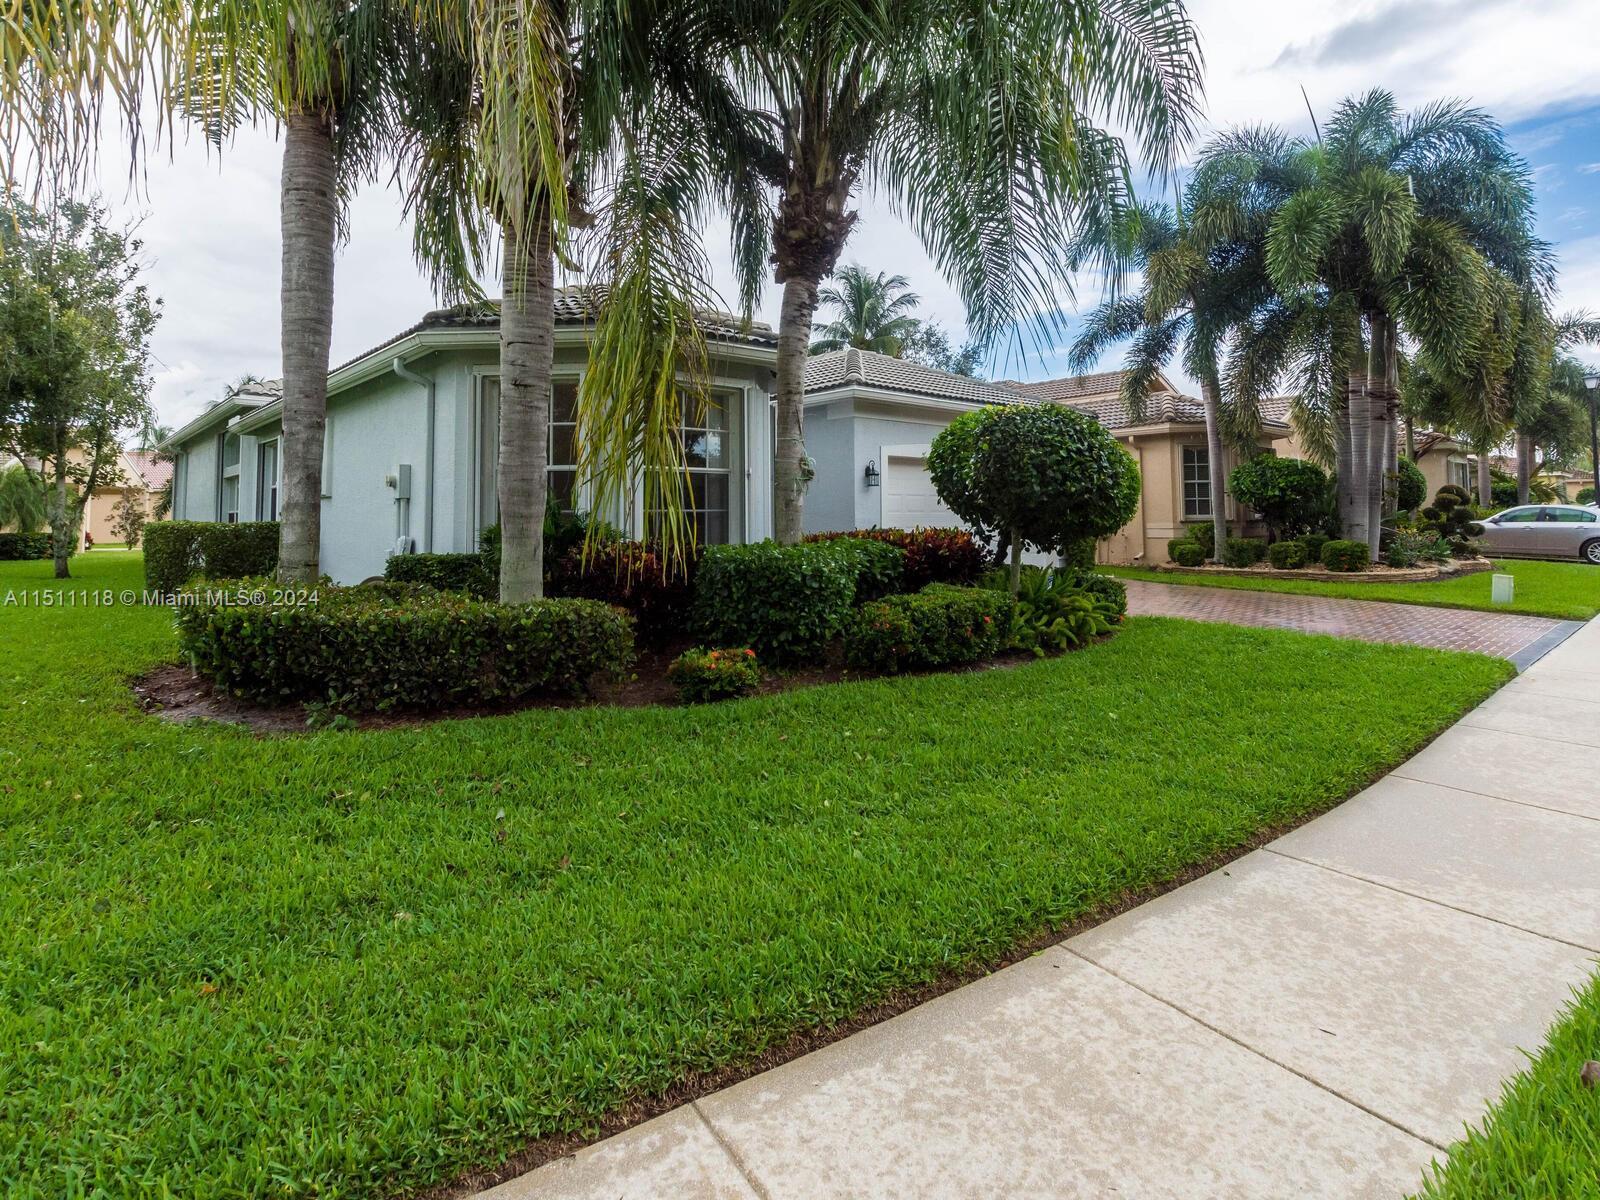 Immerse Yourself in Lakeside Tranquility

This South Florida residence blends style, comfort, and 